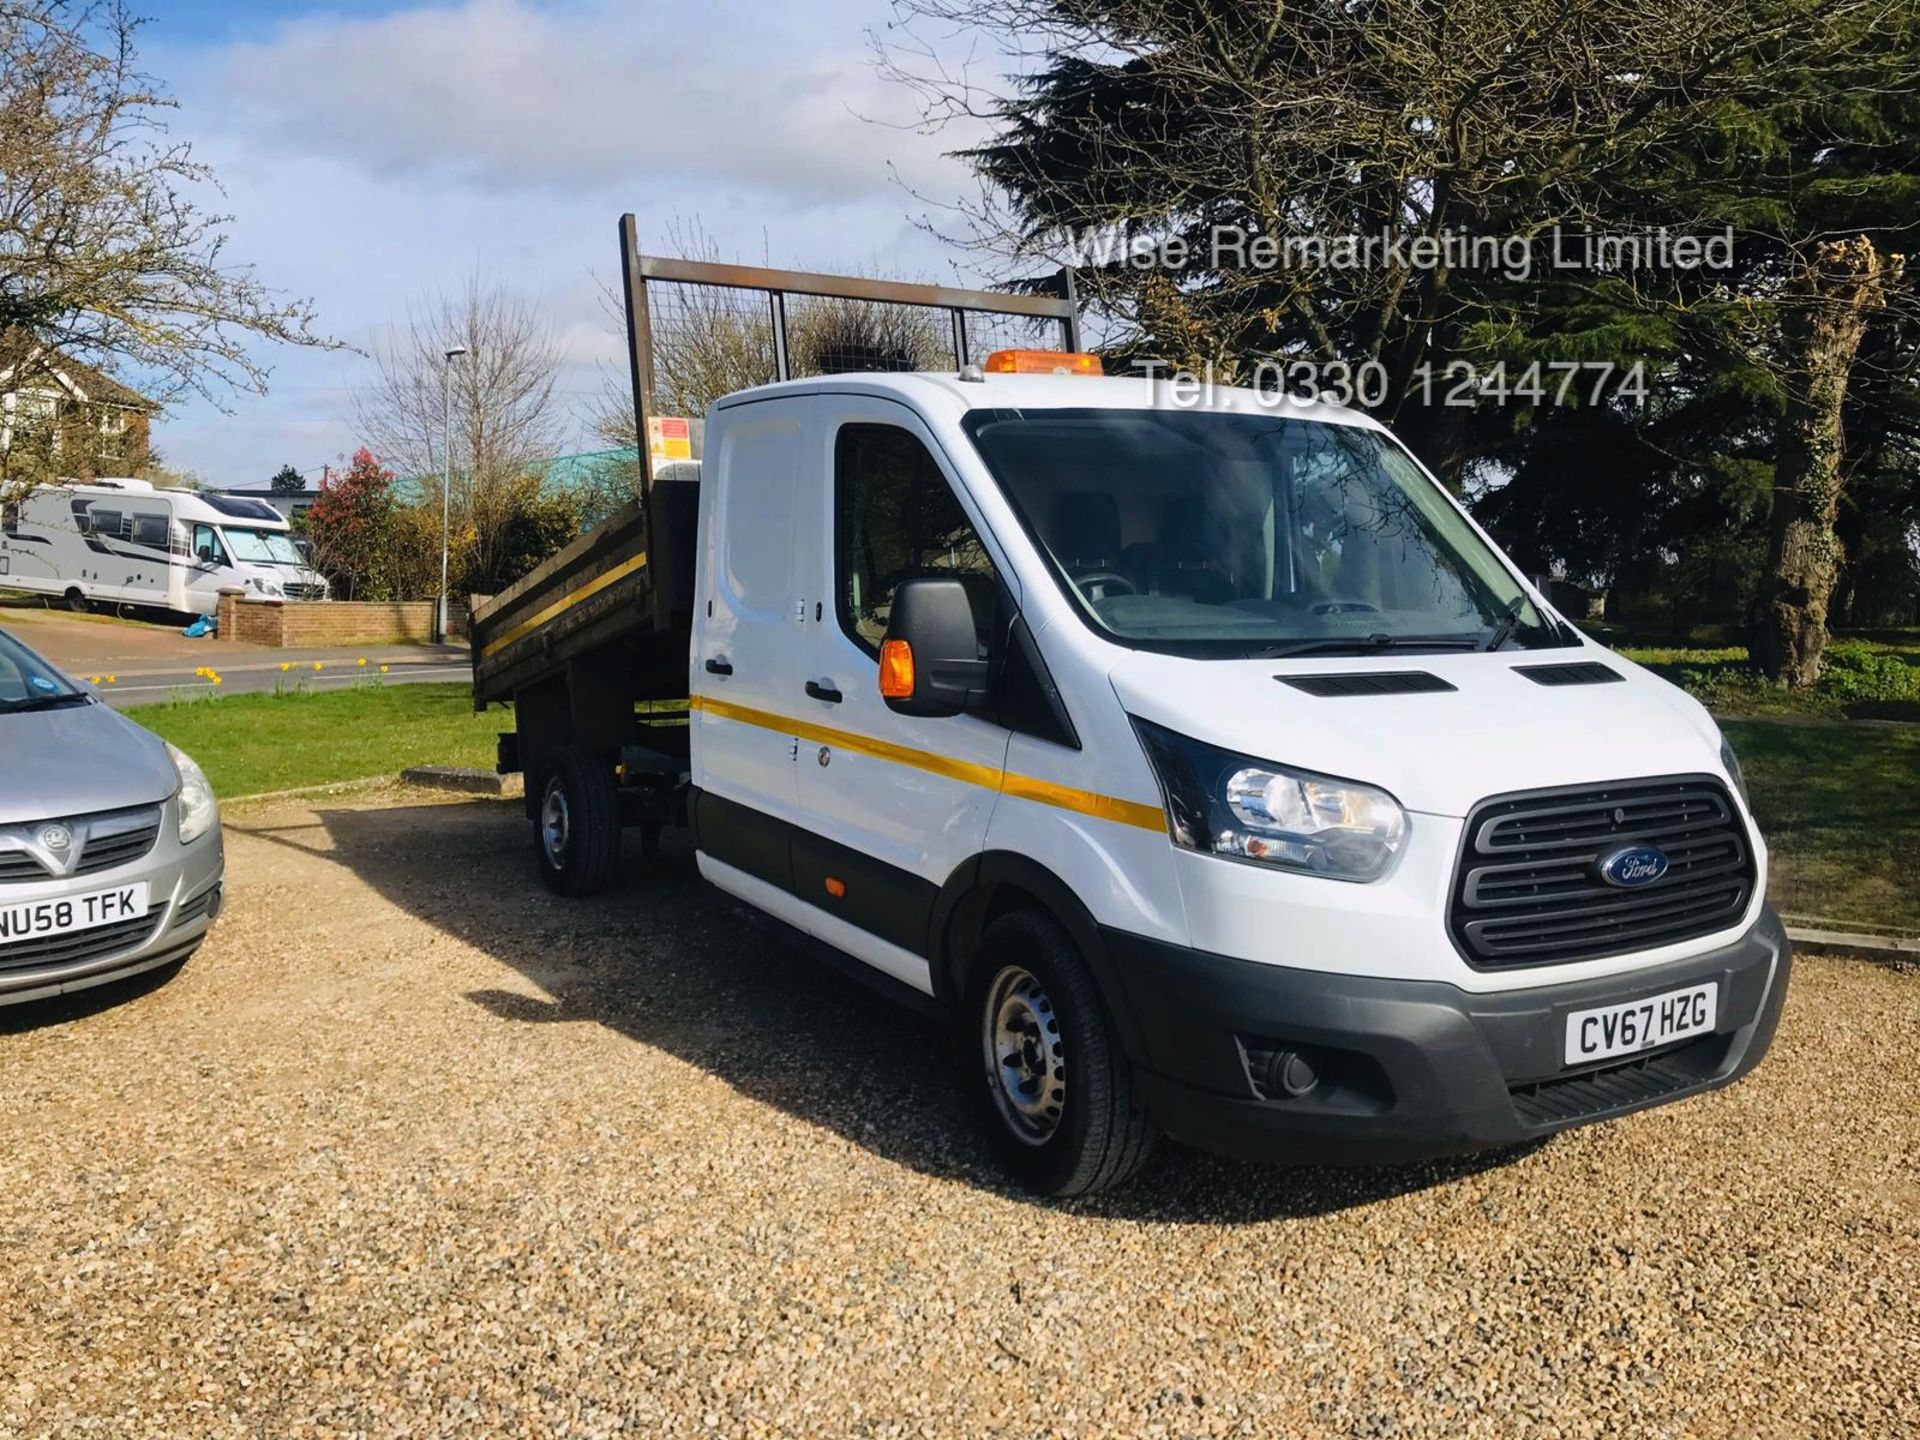 Ford Transit 350 2.0 TDCI Double Cab Tipper 2018 Model - 1 Owner From New